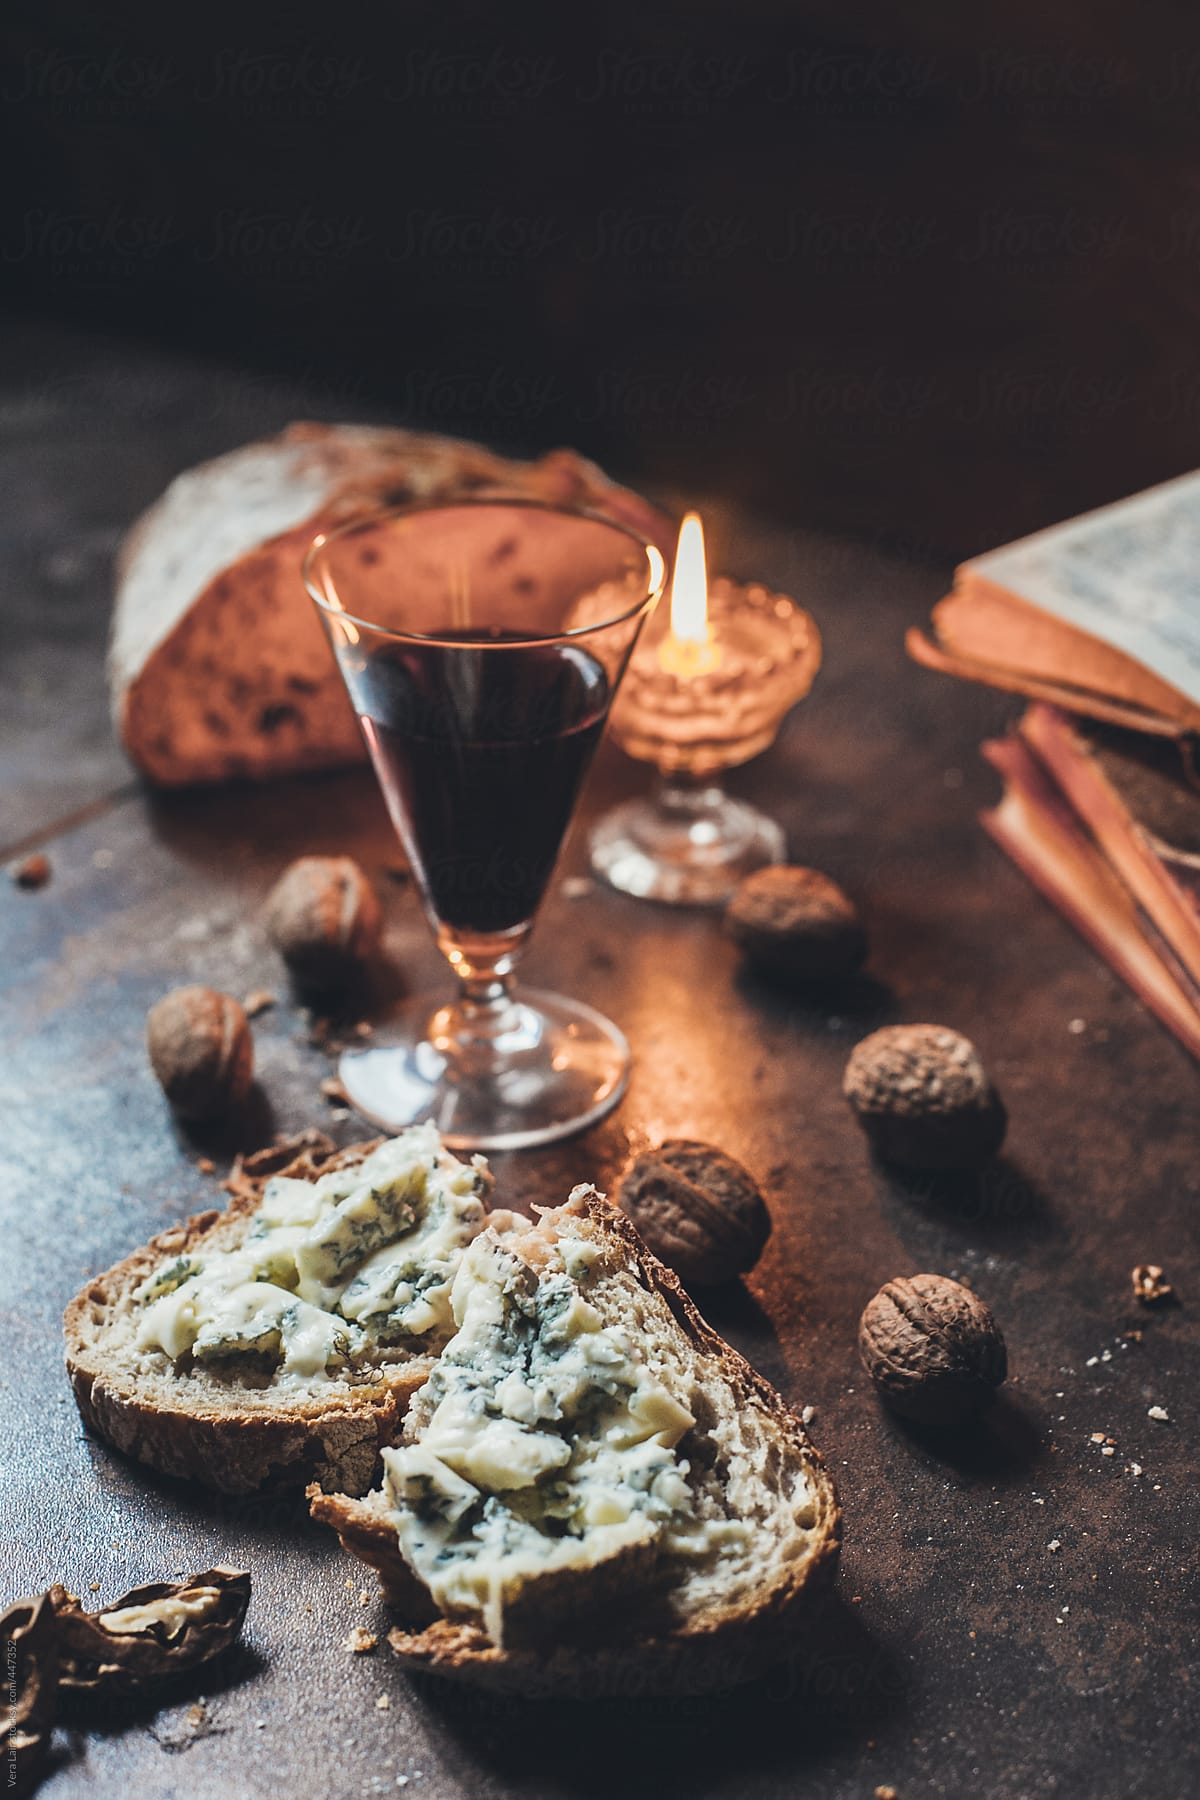 Slice of bread with blue cheese, wine, nuts and candle